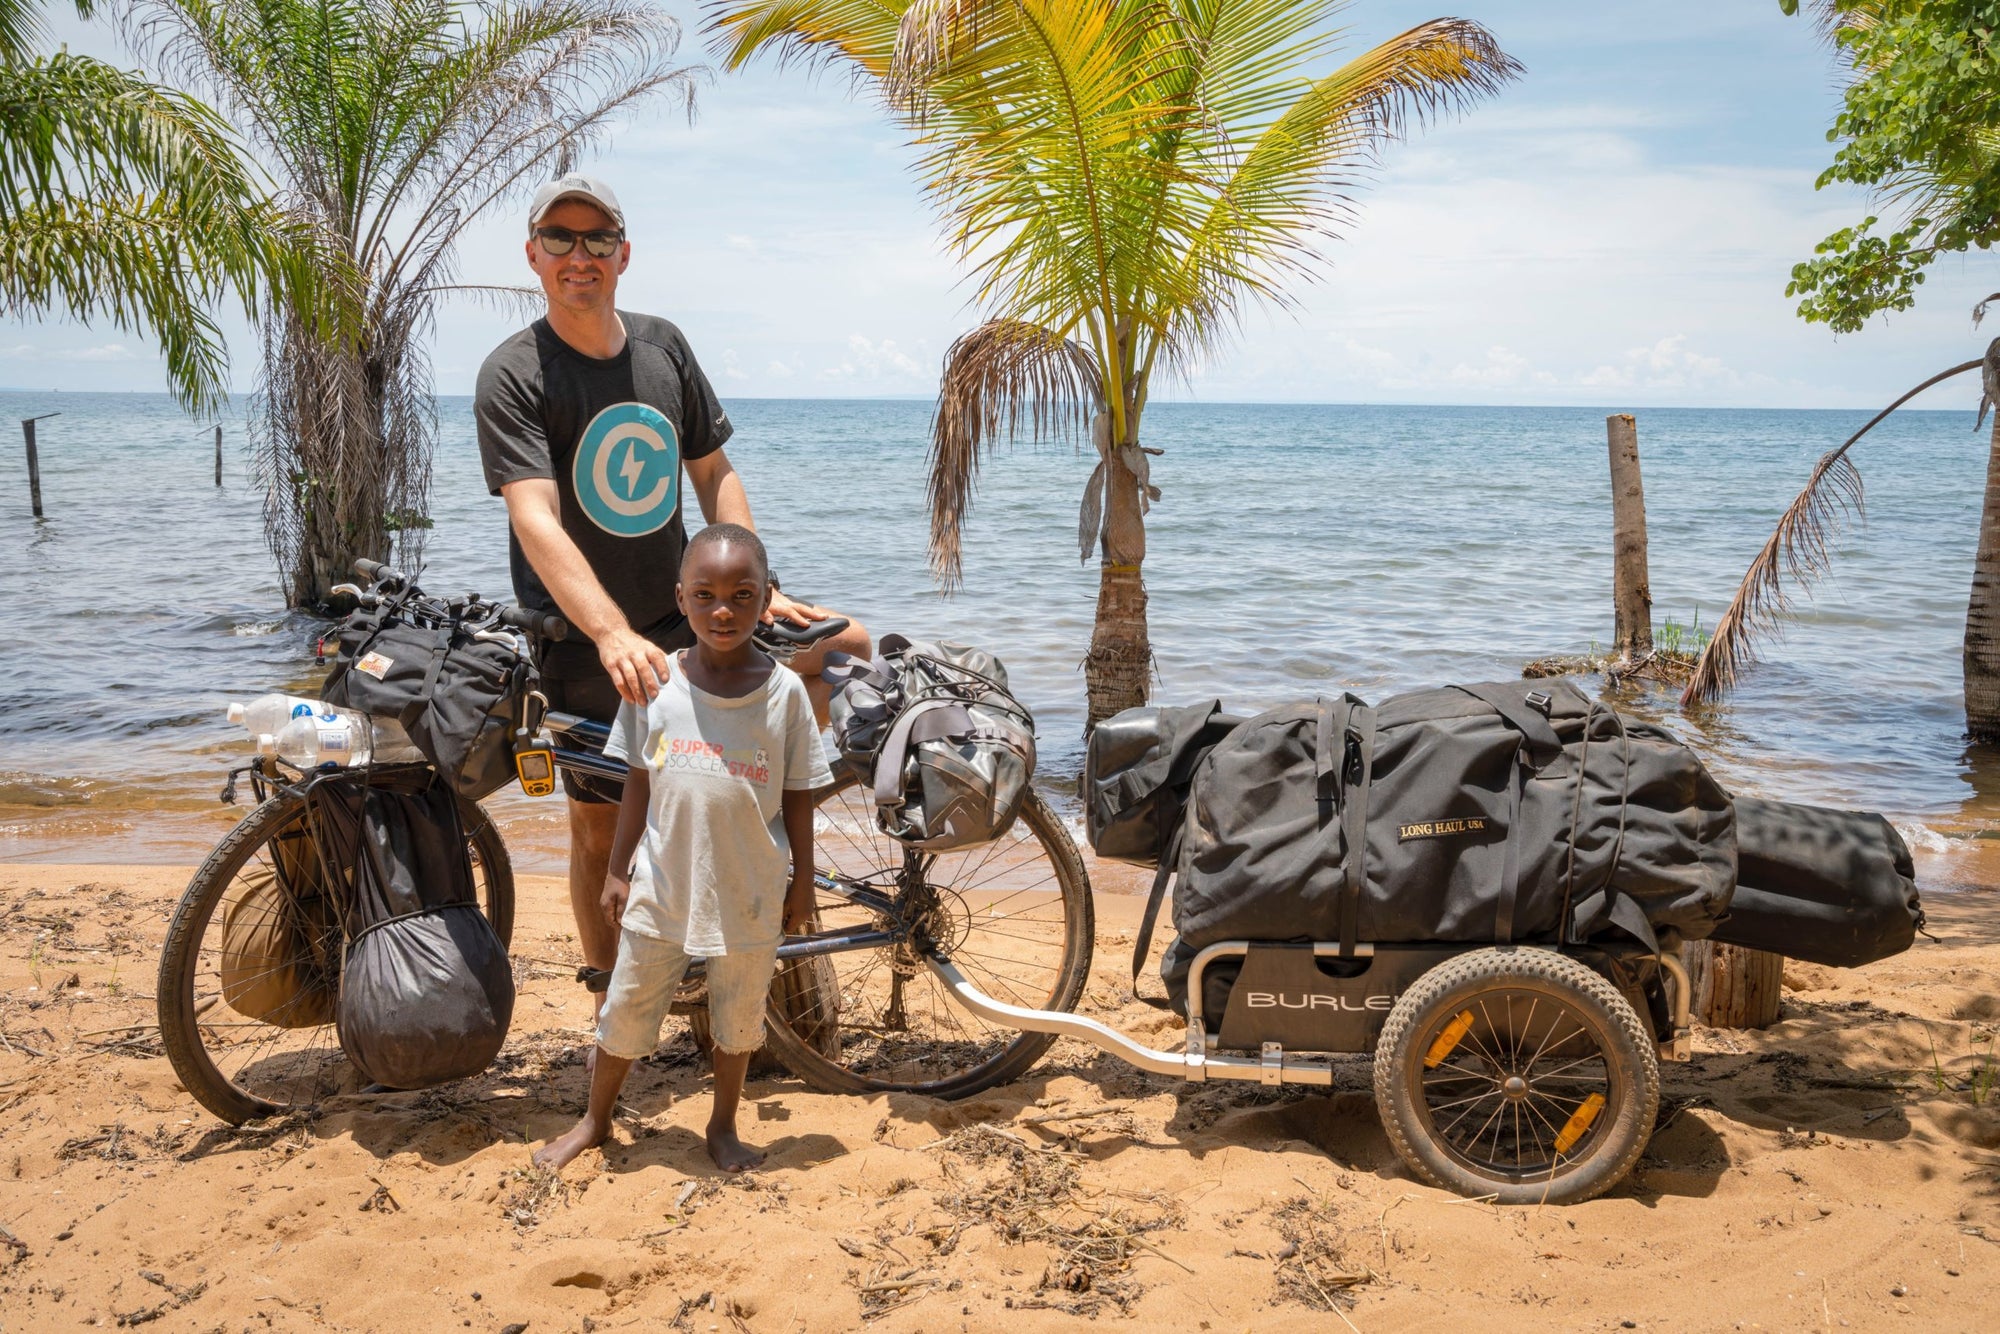 man standing with child in frontof bike and fully loaded cargo trailer on a sandy shore. lake and palm trees in background